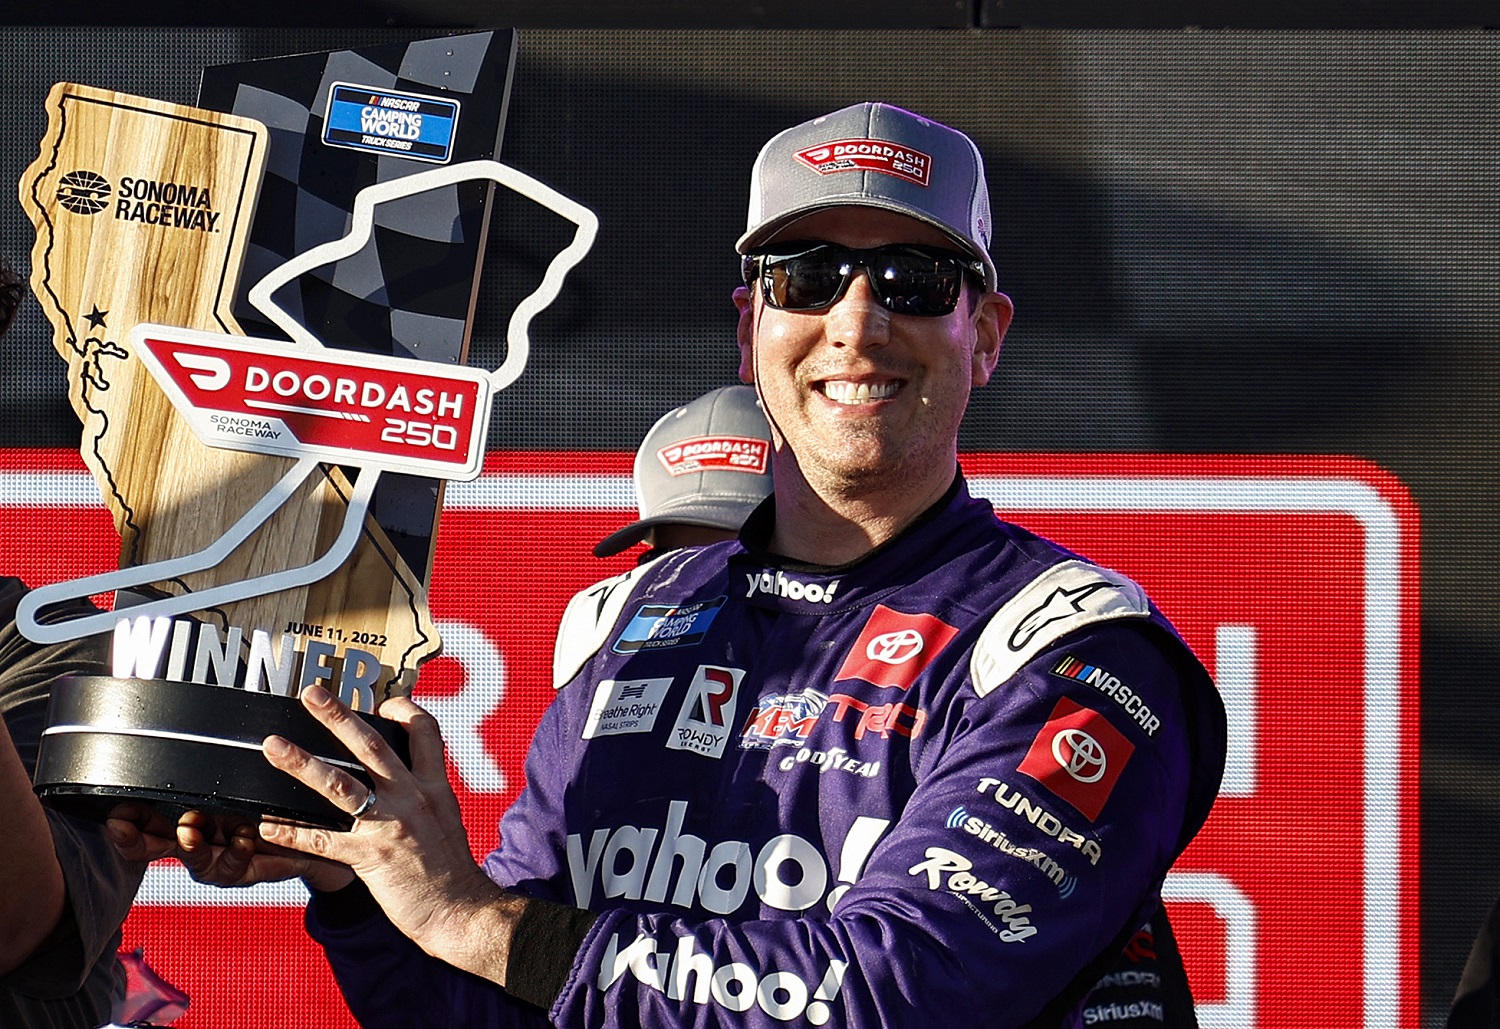 Kyle Busch celebrates in victory lane after winning the NASCAR Camping World Truck Series DoorDash 250 at Sonoma Raceway on June 11, 2022.